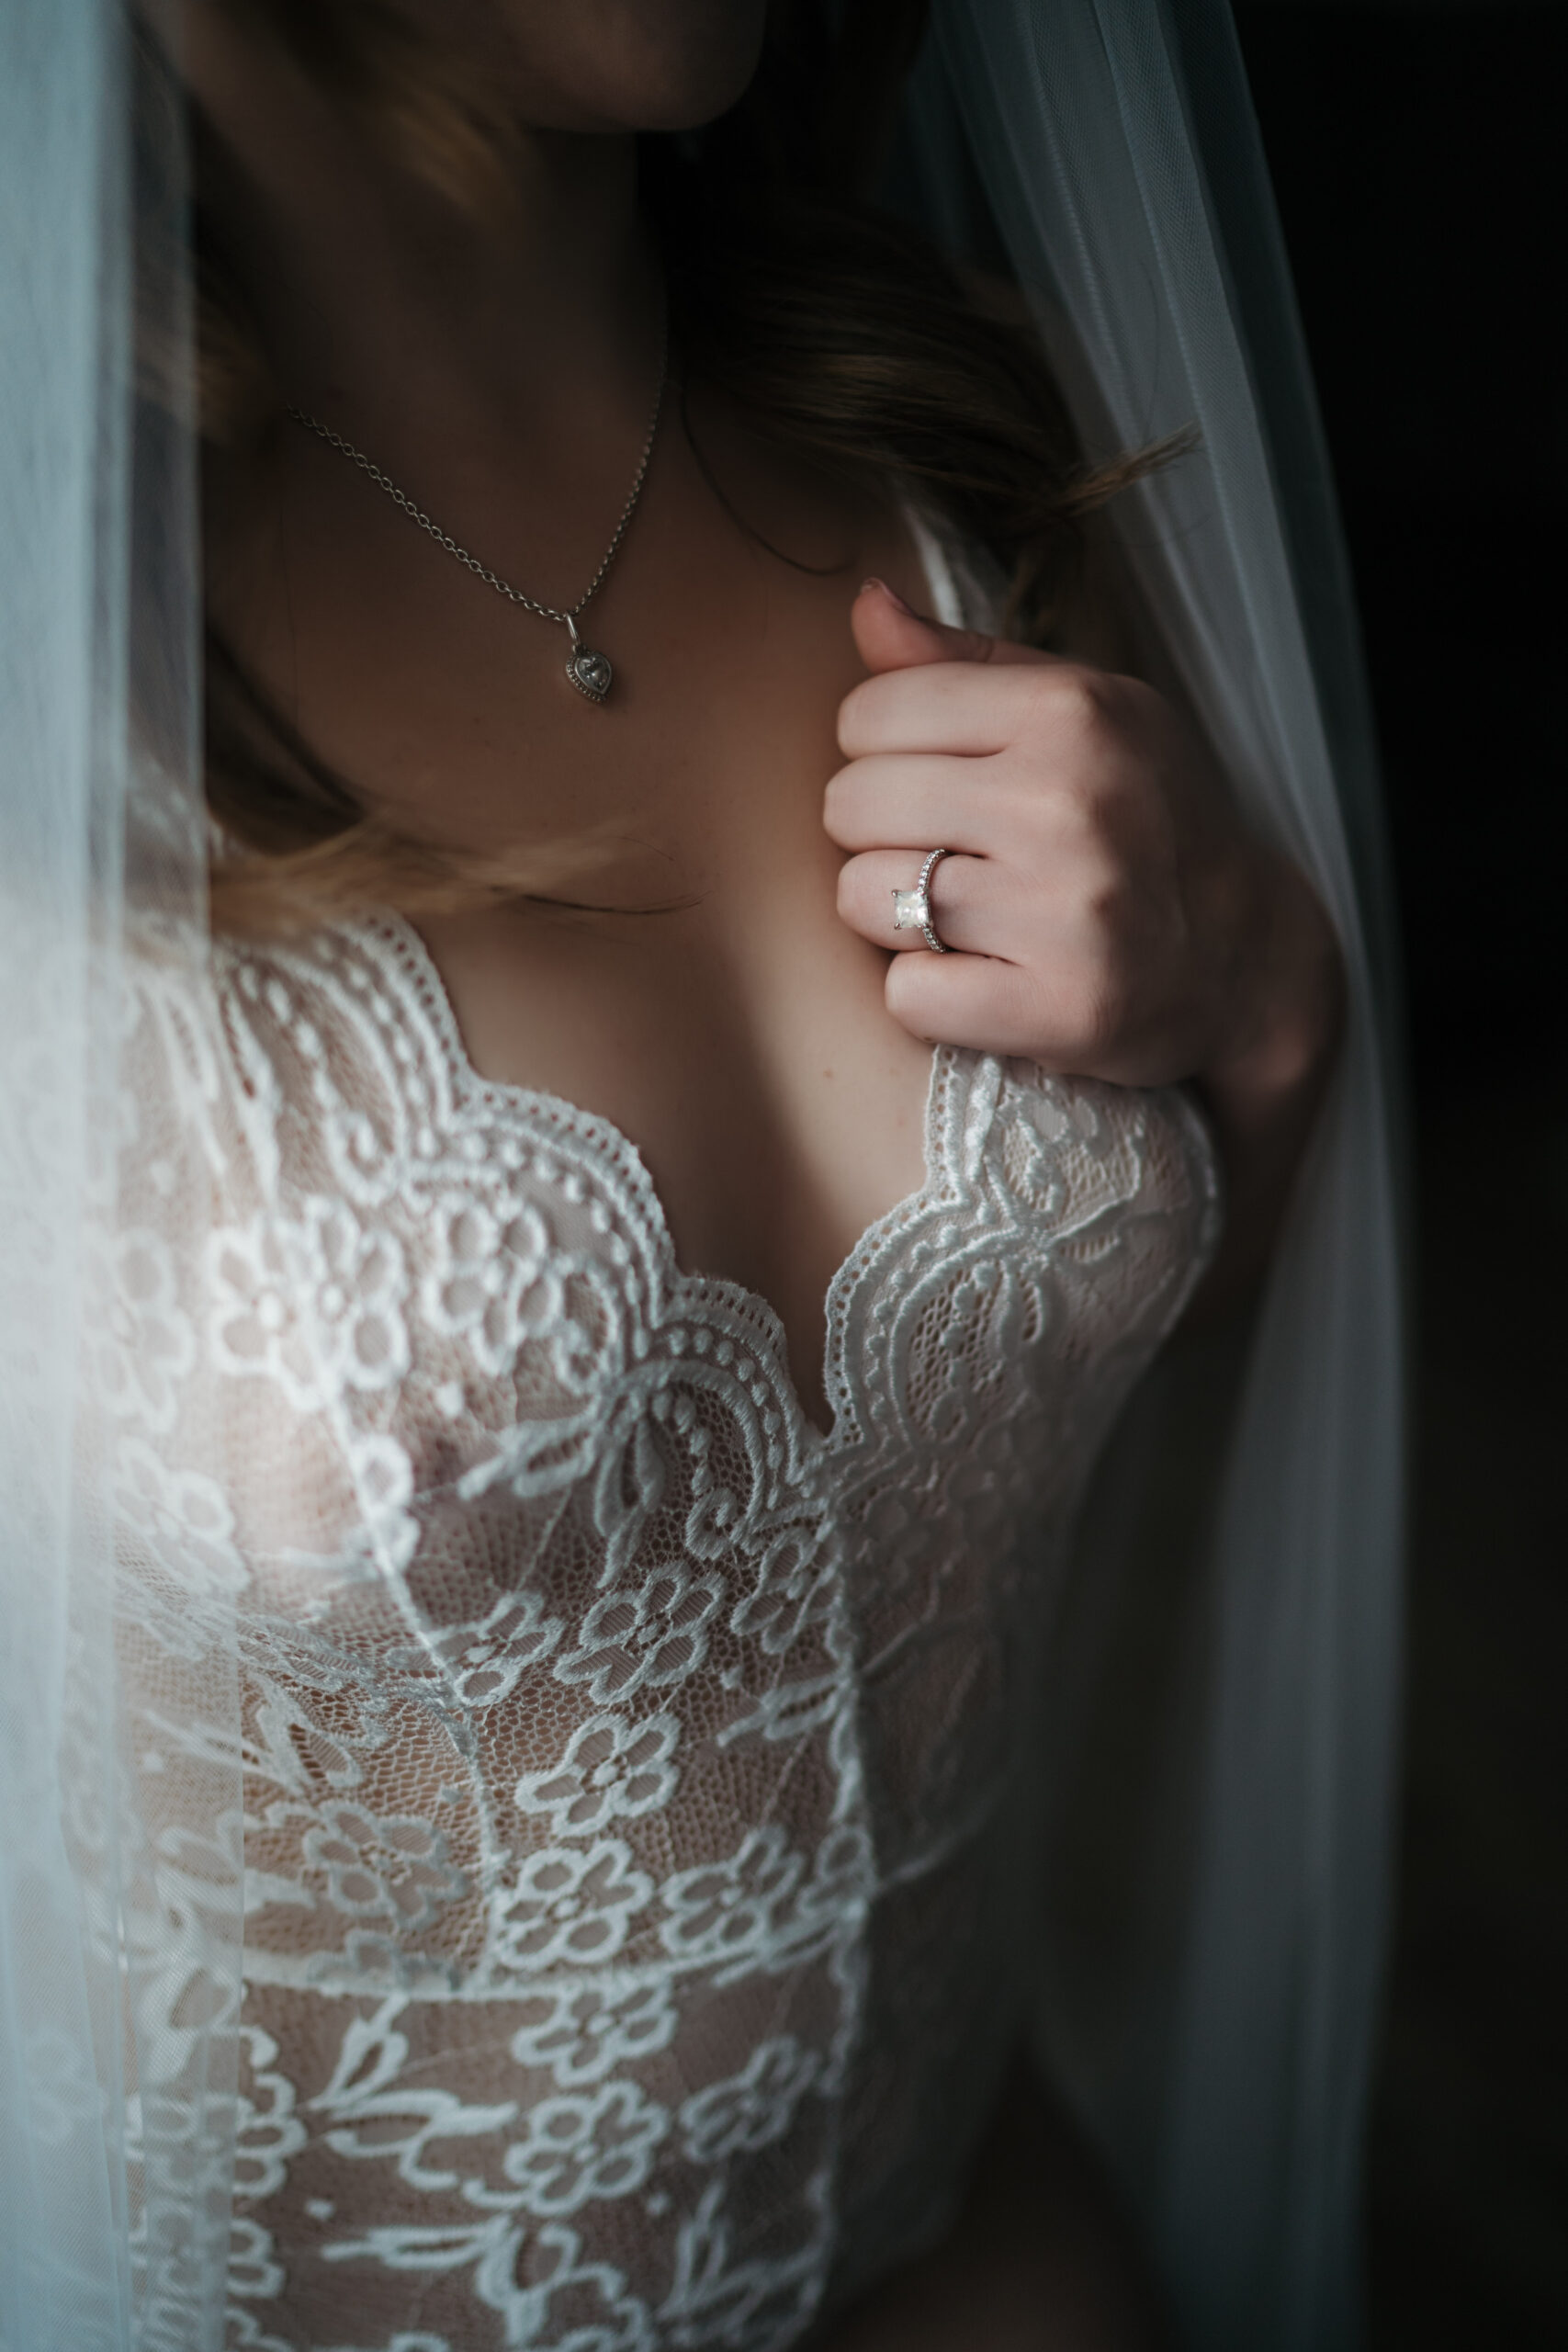 woman in white lingerie showing off her engagement ring